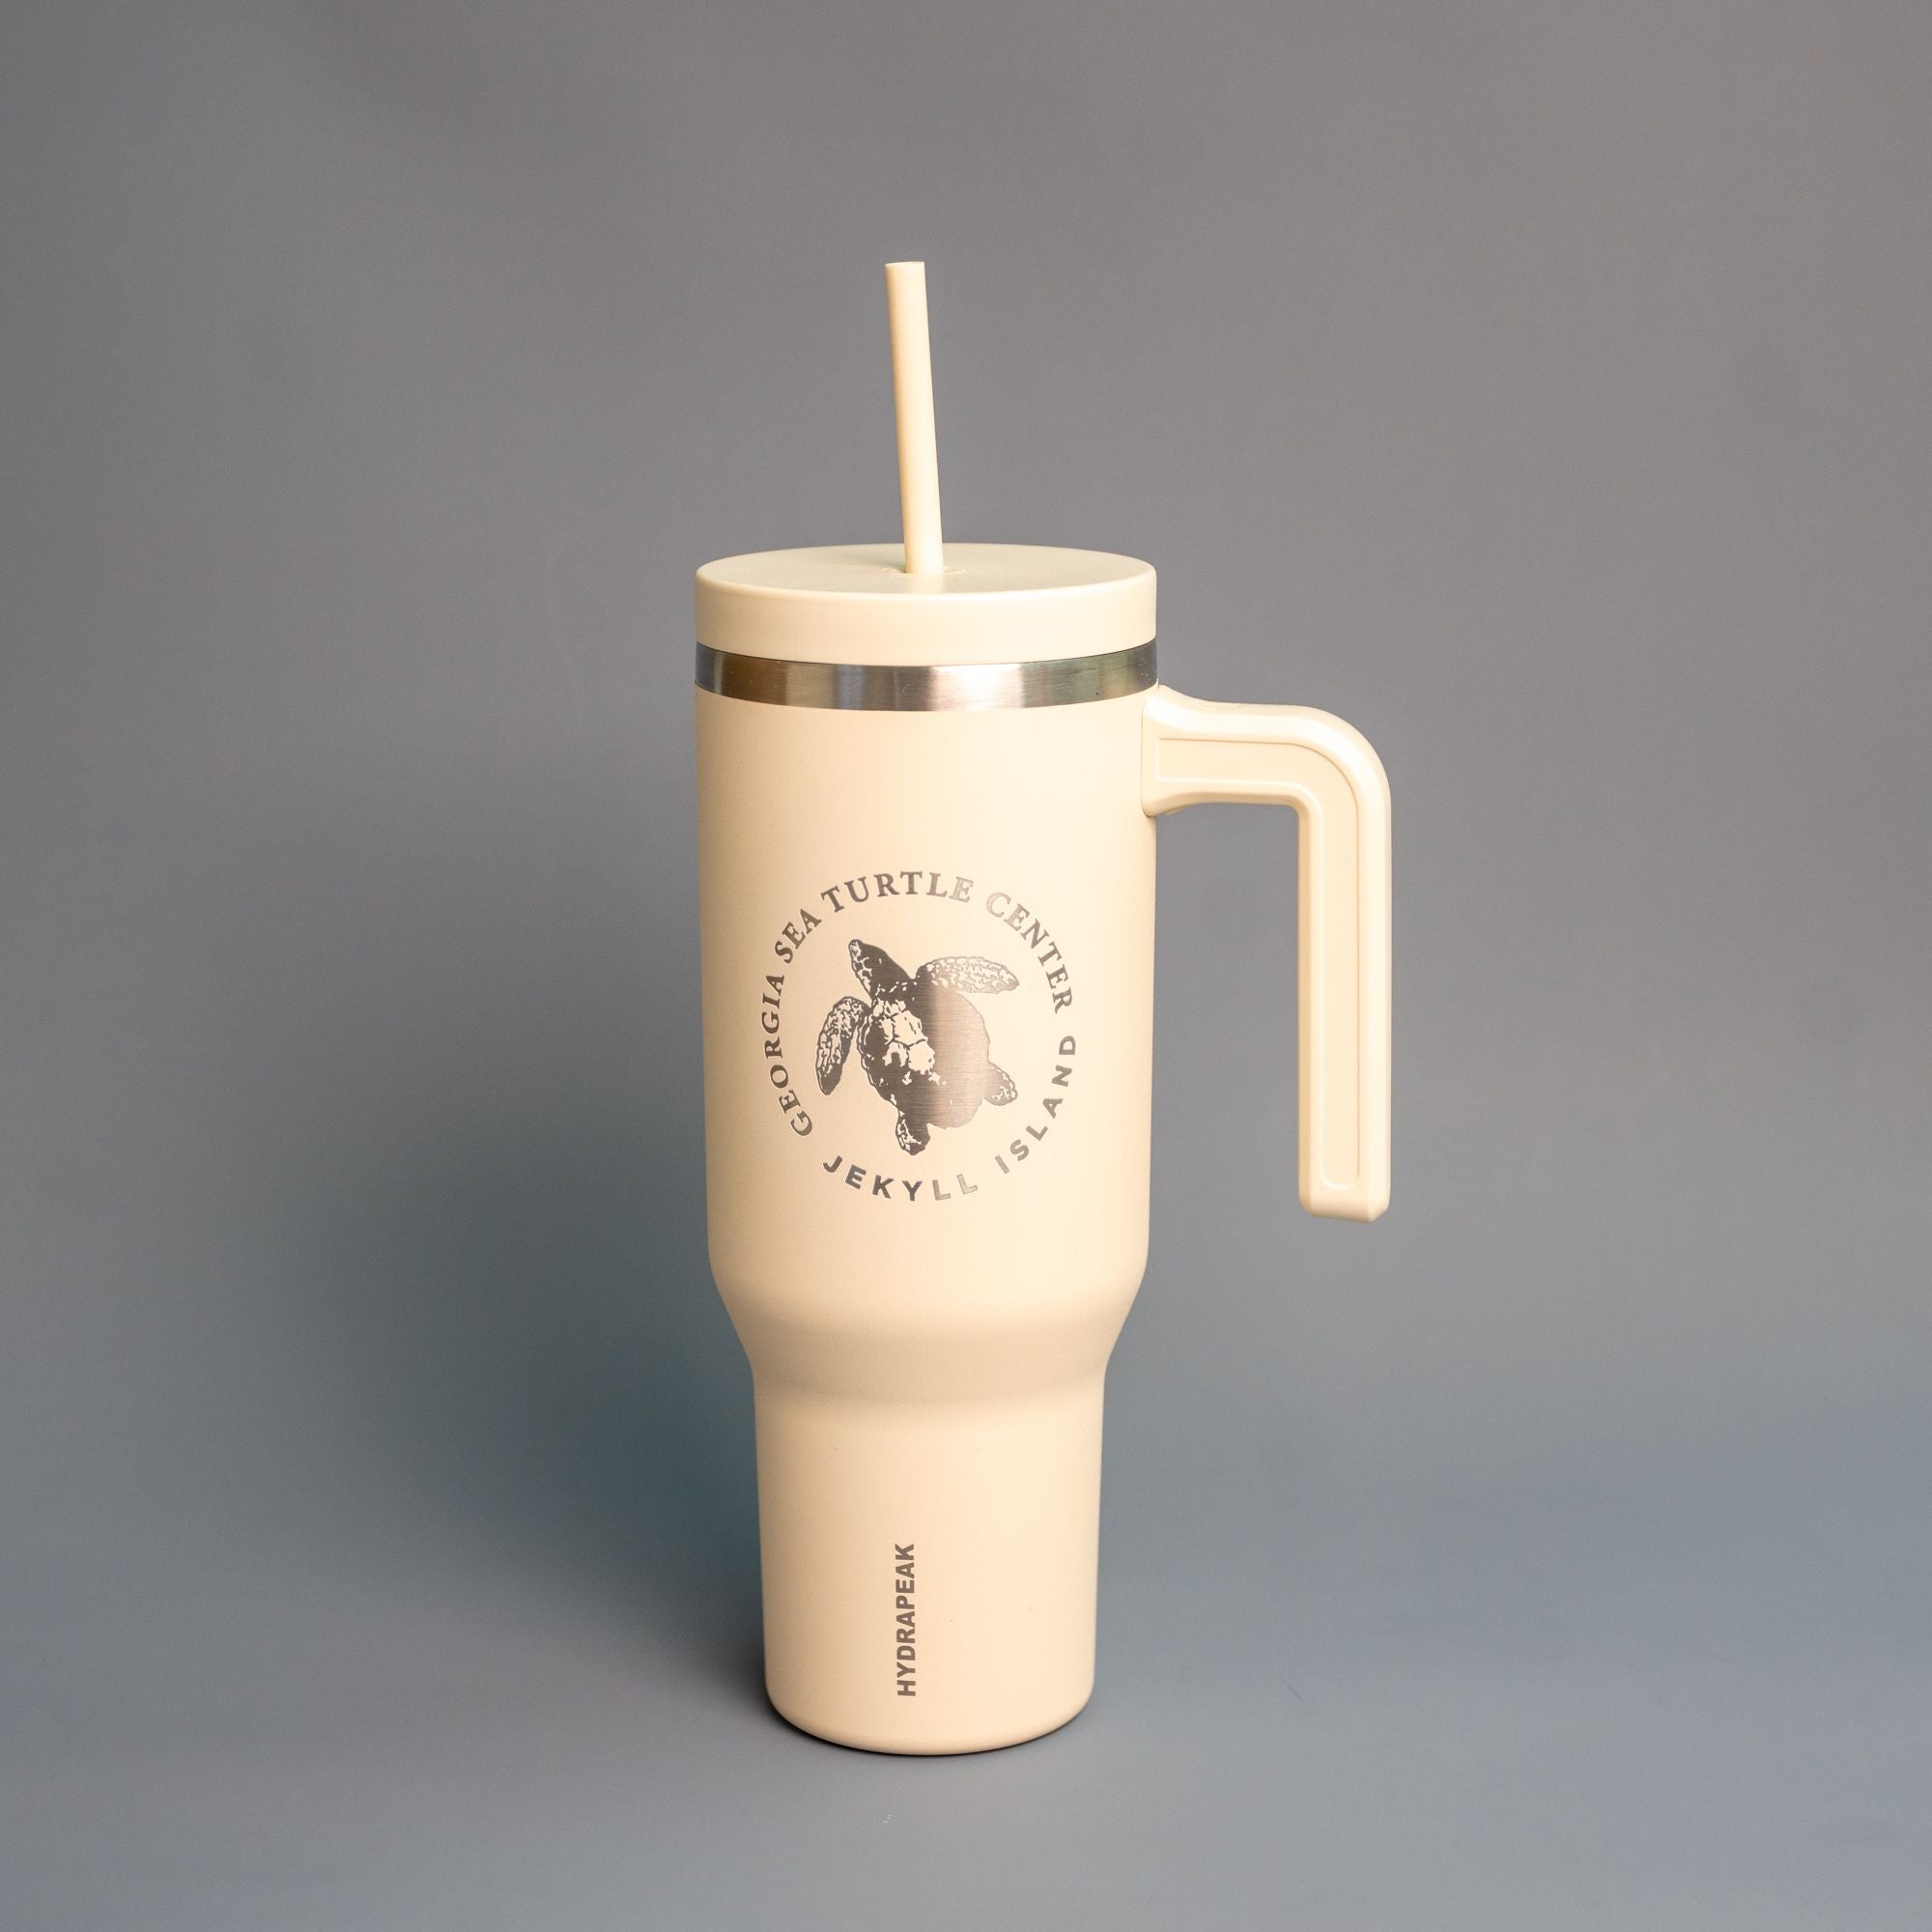 Voyager 40 oz Tumbler With Handle and Straw Lid - Modern Cream